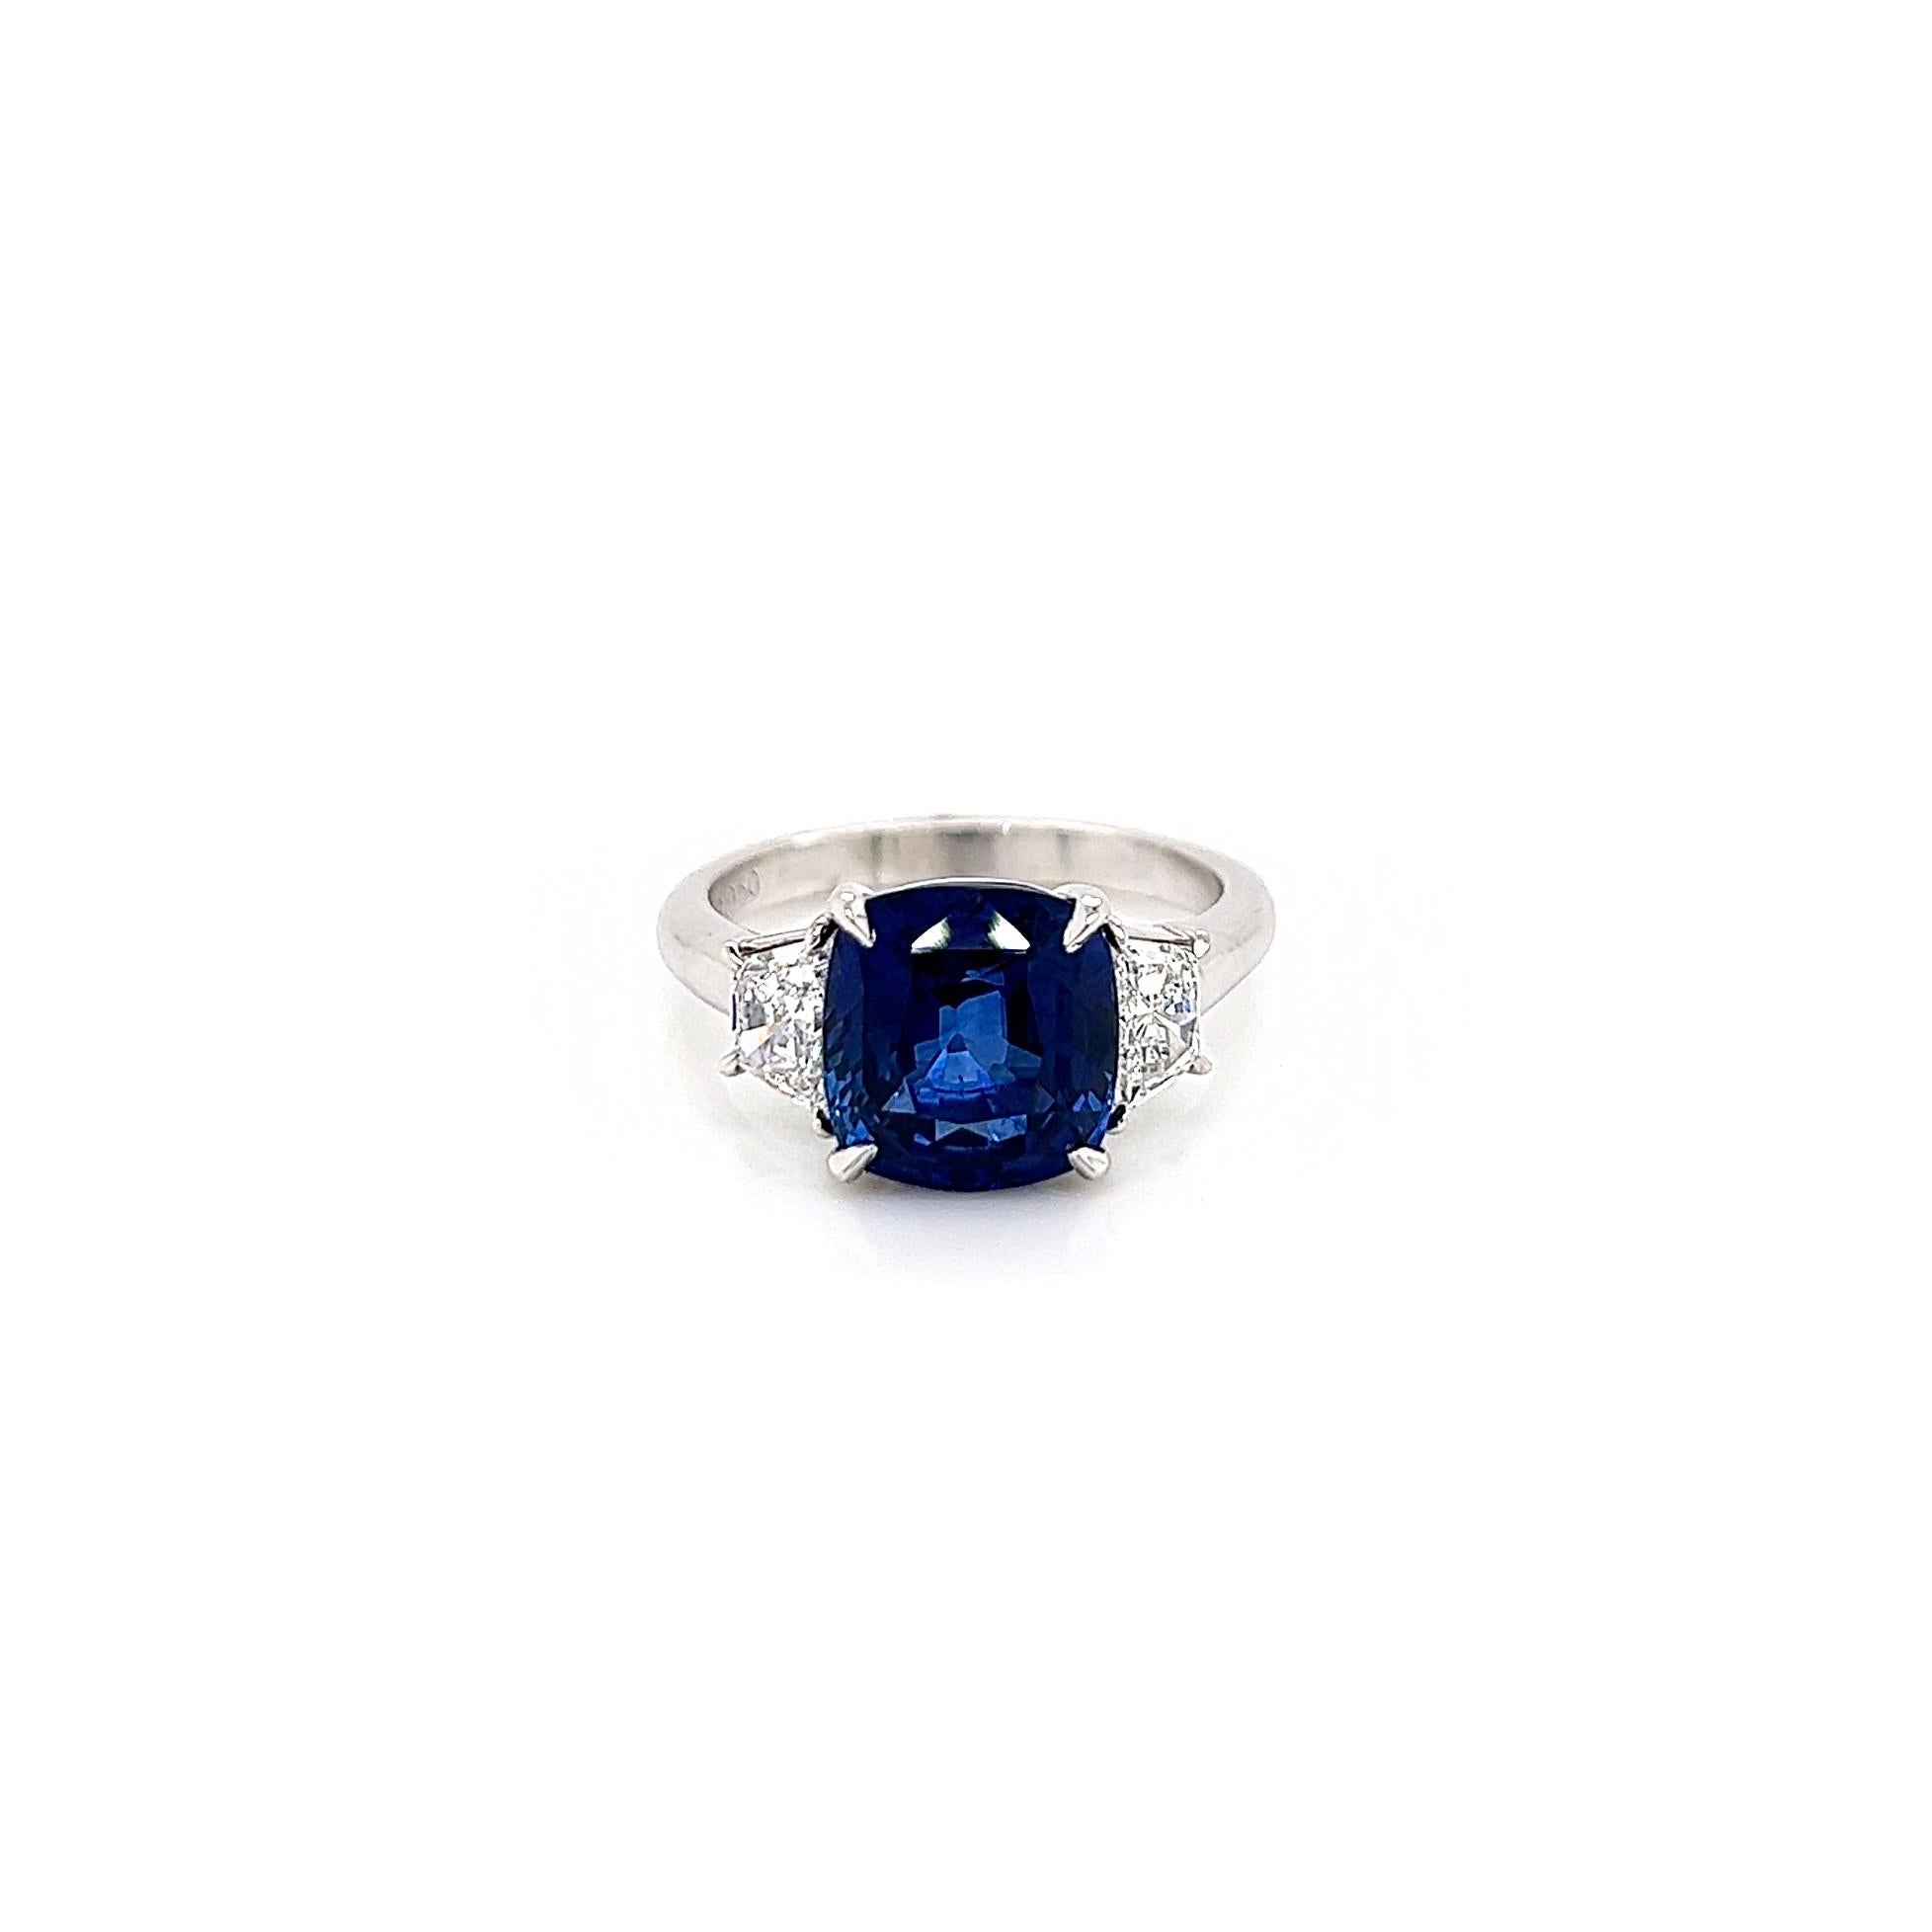 5.52 Total Carat Sapphire and Diamond Ladies Ring. GIA Certified.

Dazzling yet extravagant royal blue sapphire and diamond ring, perfect to take her breath away. Set up a beautiful dinner and watch her glow as soon as she receives this brilliant